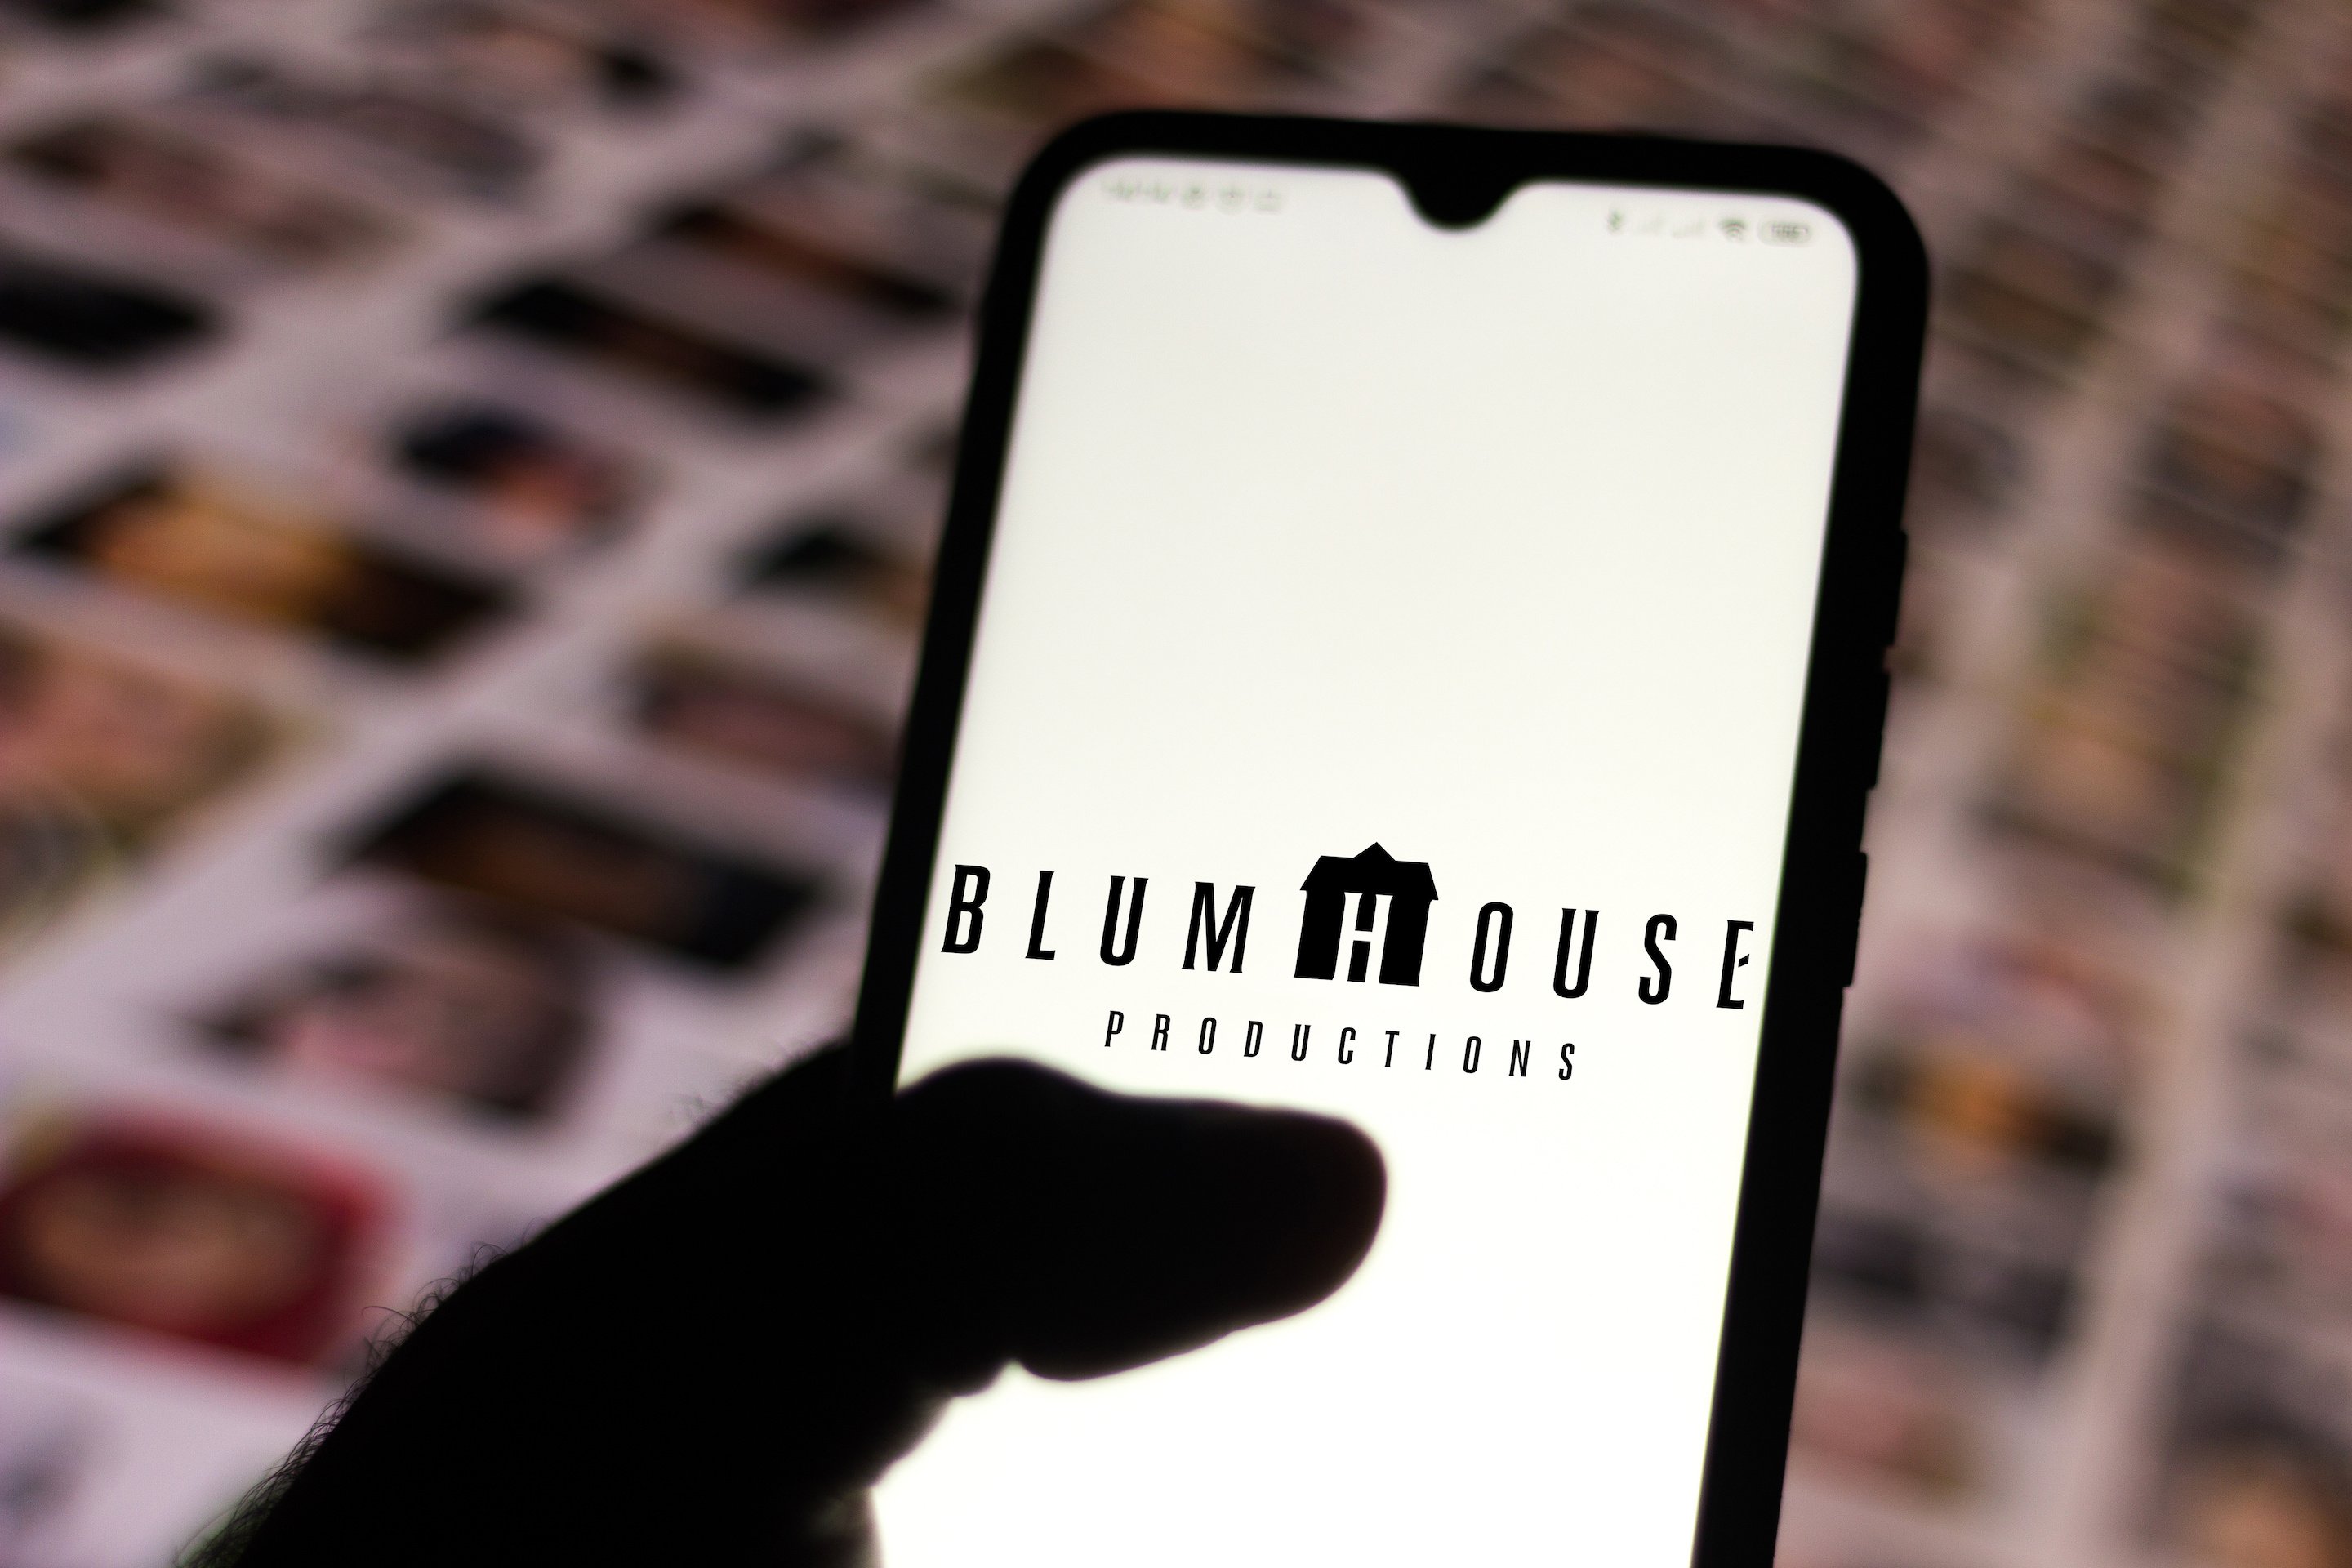 Blumhouse Productions, home of The Manor movie, logo appears on a phone screen